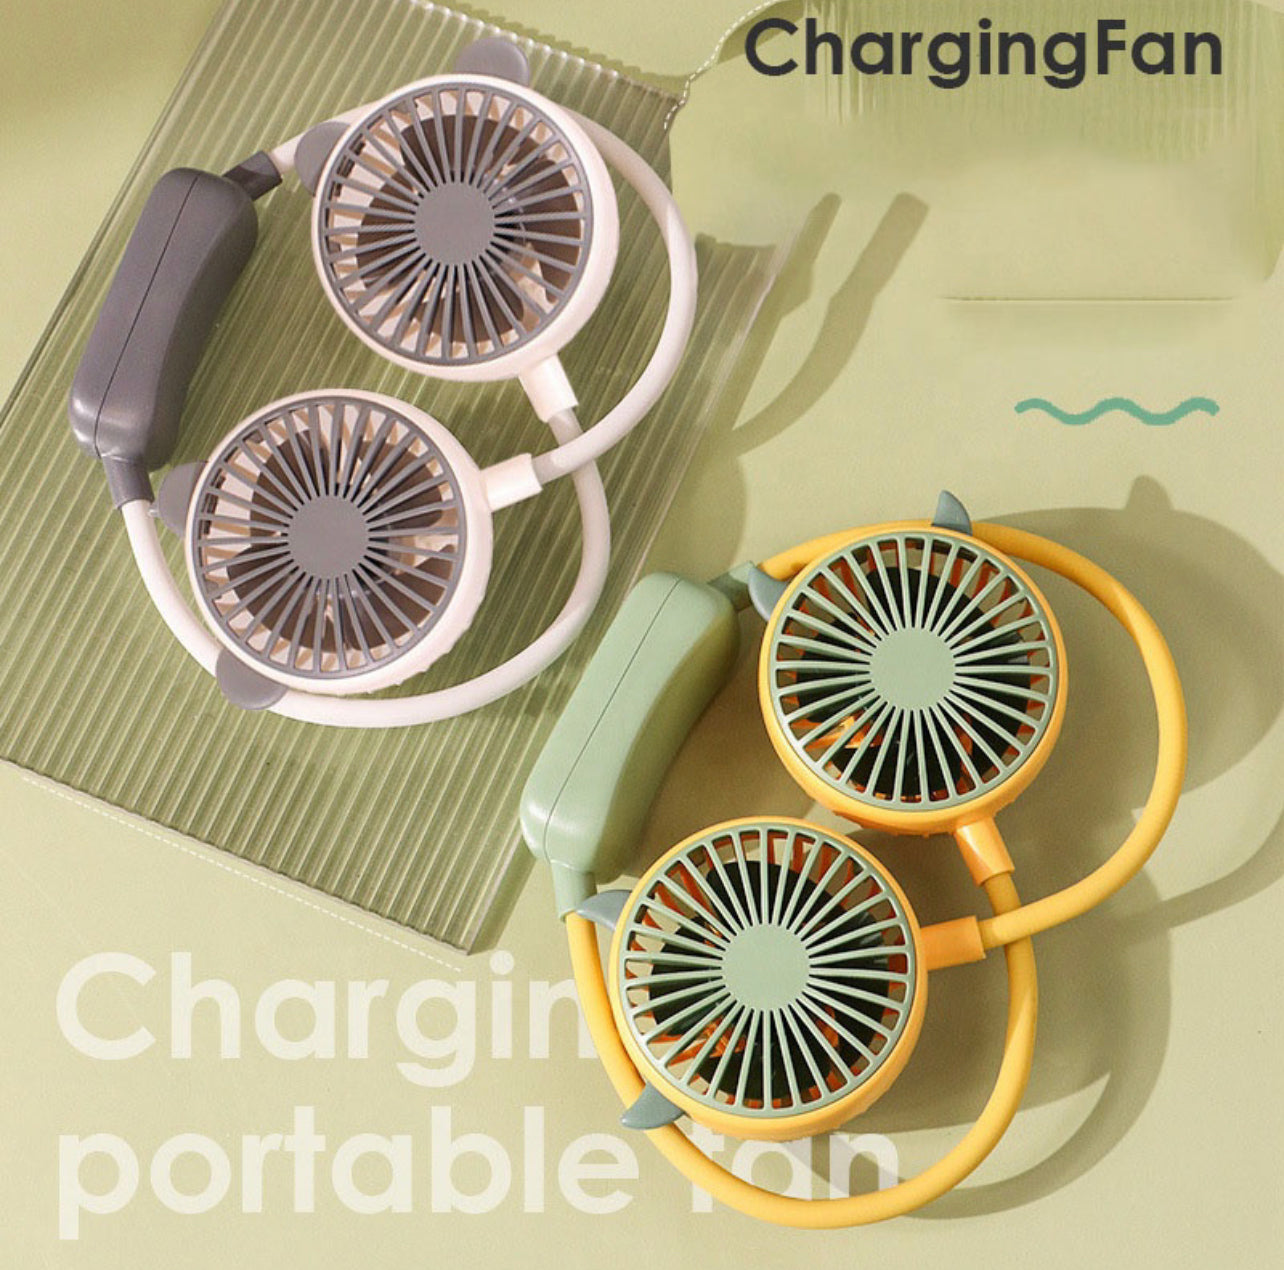 Stay Cool on the Go with Our 360 Degree Rotatable Hand-Free Neck Fan